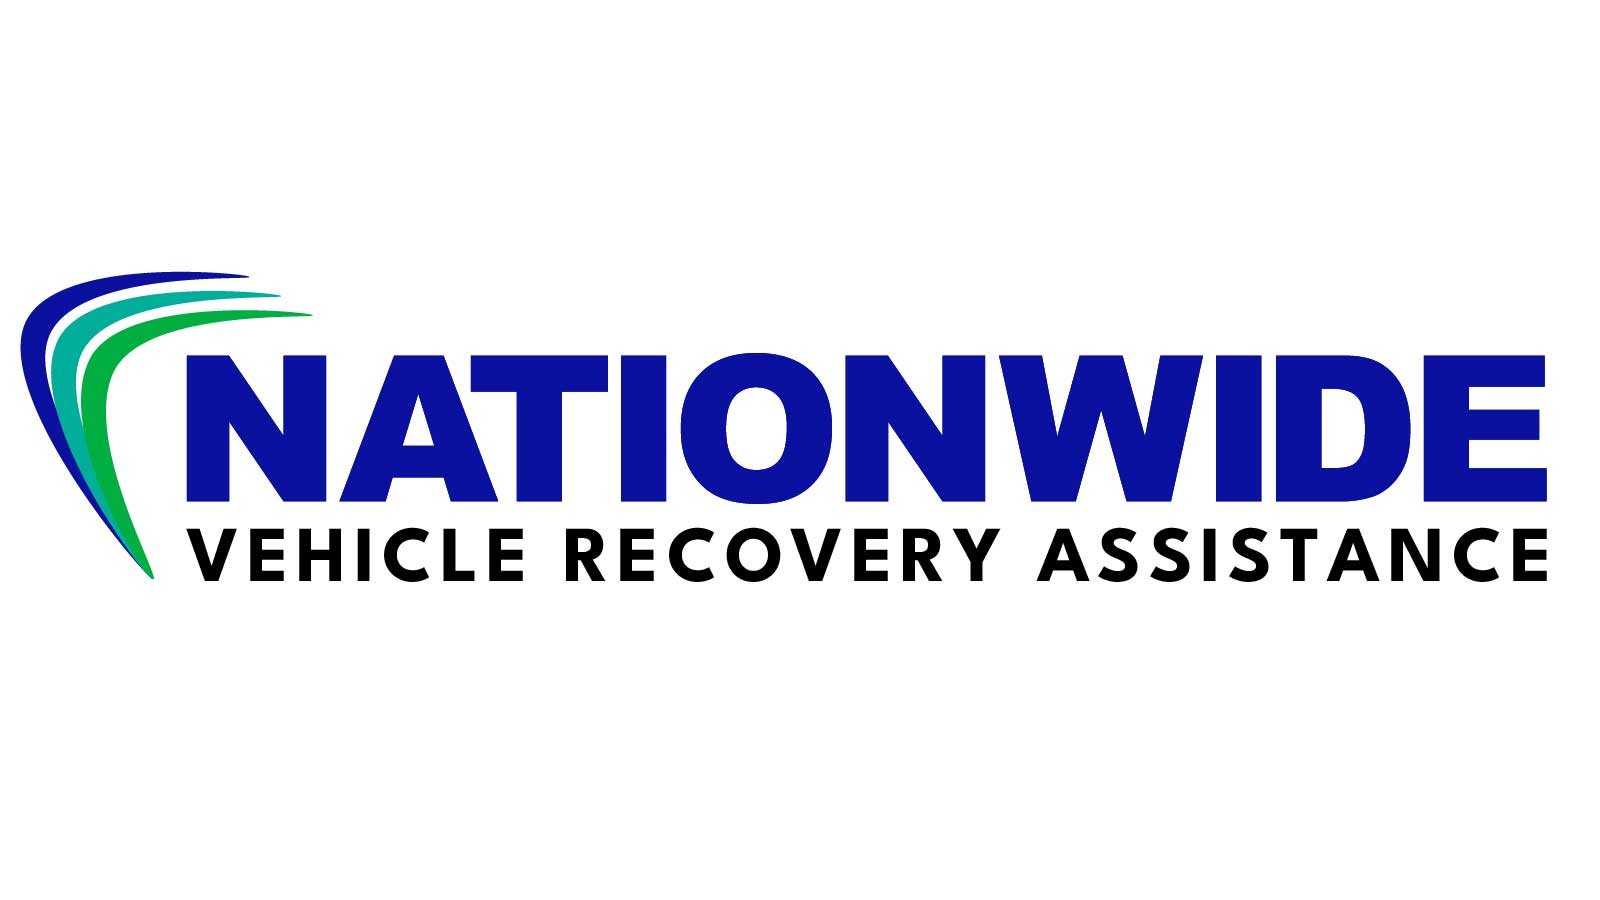 Nationwide Vehicle Recovery Assistance